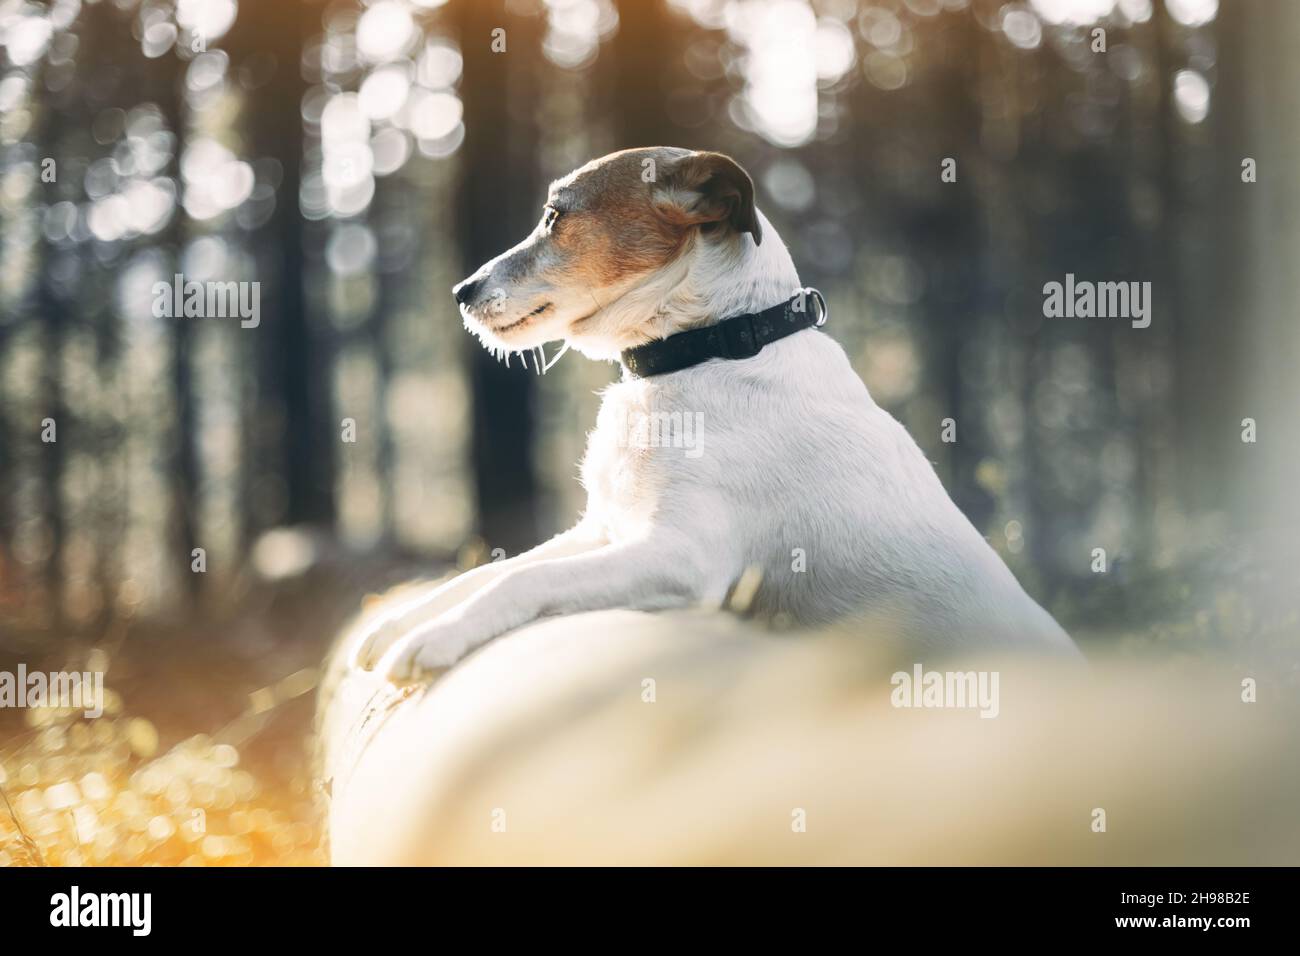 Jack russel terrier dog in autumn forest. Animal and nature photography Stock Photo